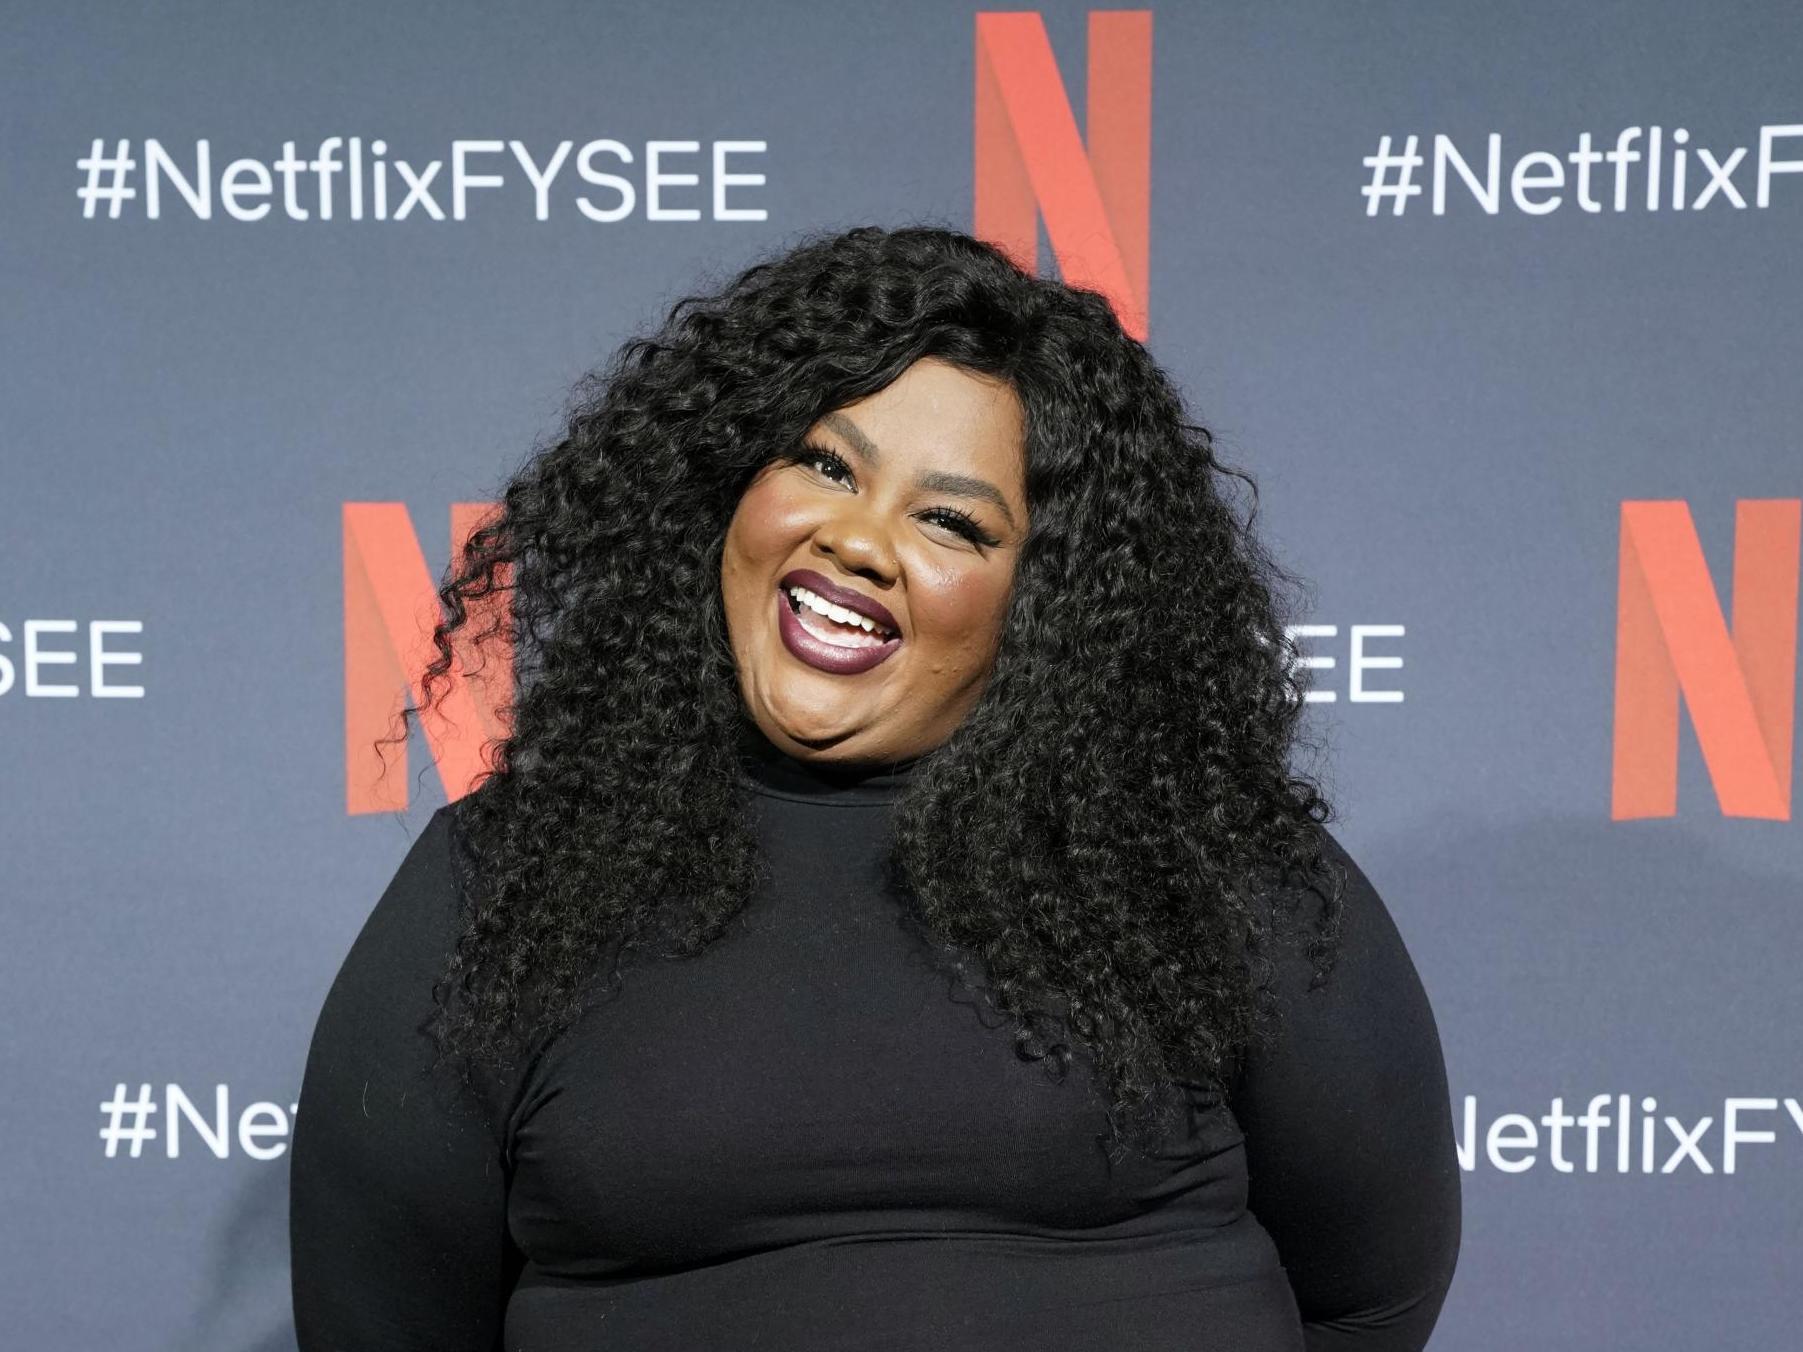 Nicole Byer, the host of Nailed It!